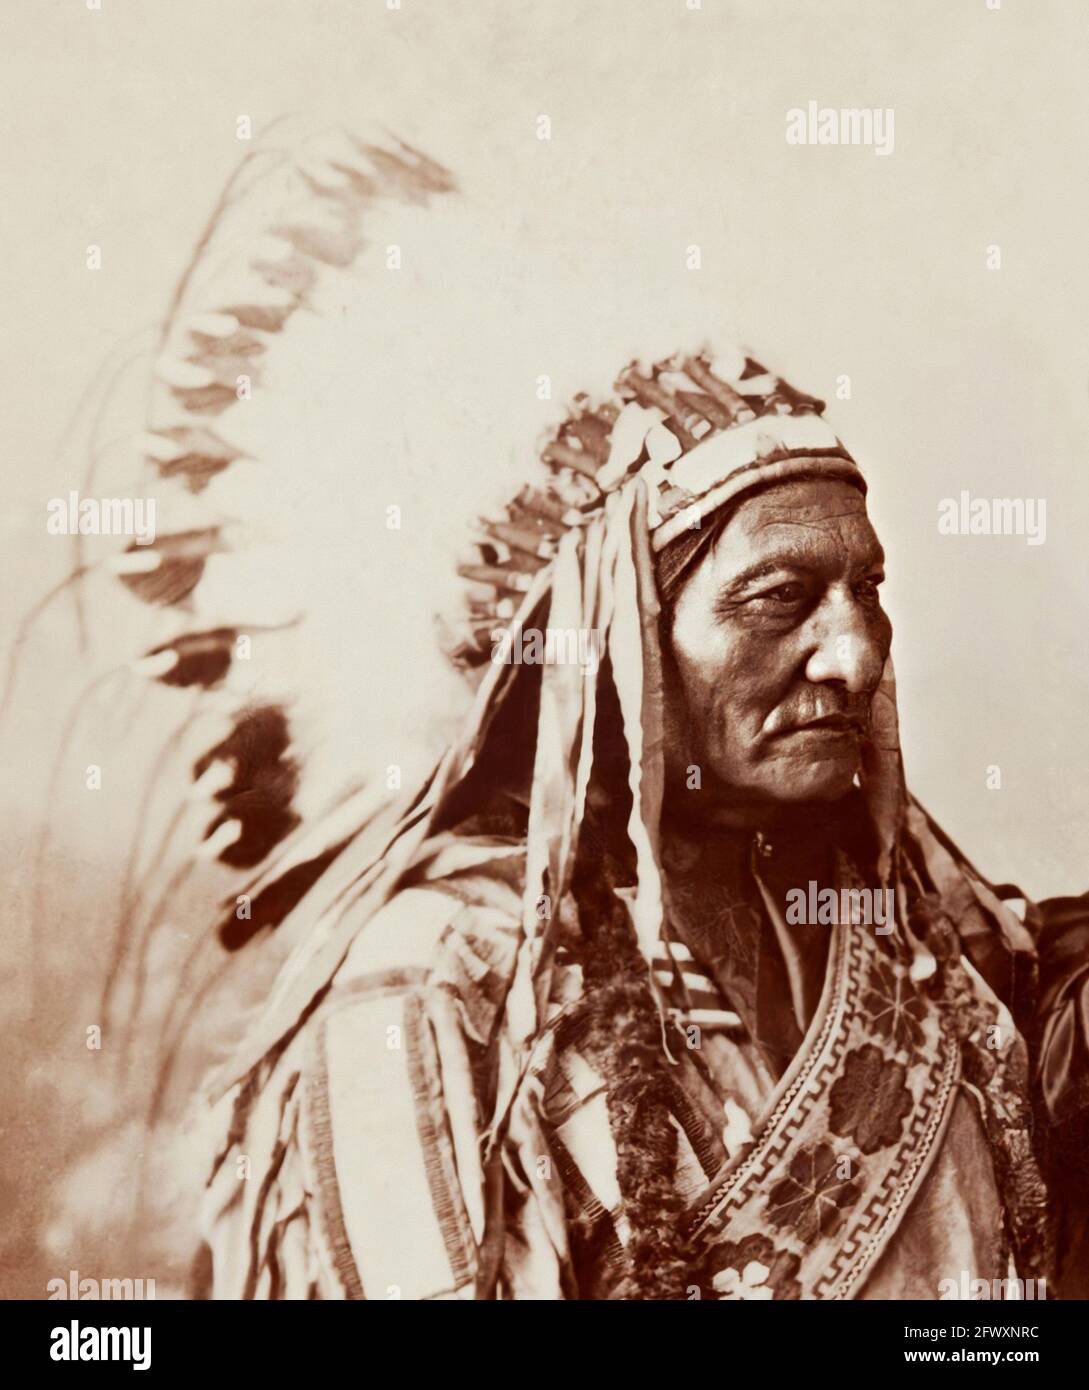 1880 ca , Montreal , CANADA : The celebrated Chef SITTING BULL ( 1831 - 1890 ) of Sioux Hunkpapa at  time of WILD WEST SHOW with Buffalo Bill . Photo by W.M. Notman & Son , Montreal . - Epopea del Selvaggio WEST - -  Circus - Circo - hat - cappello - piume - feathers - Indians of America - Indiani d'America - Native Americans - Nativi americani - Pellerossa - Redskins - copricapo --- Archivio GBB Stock Photo